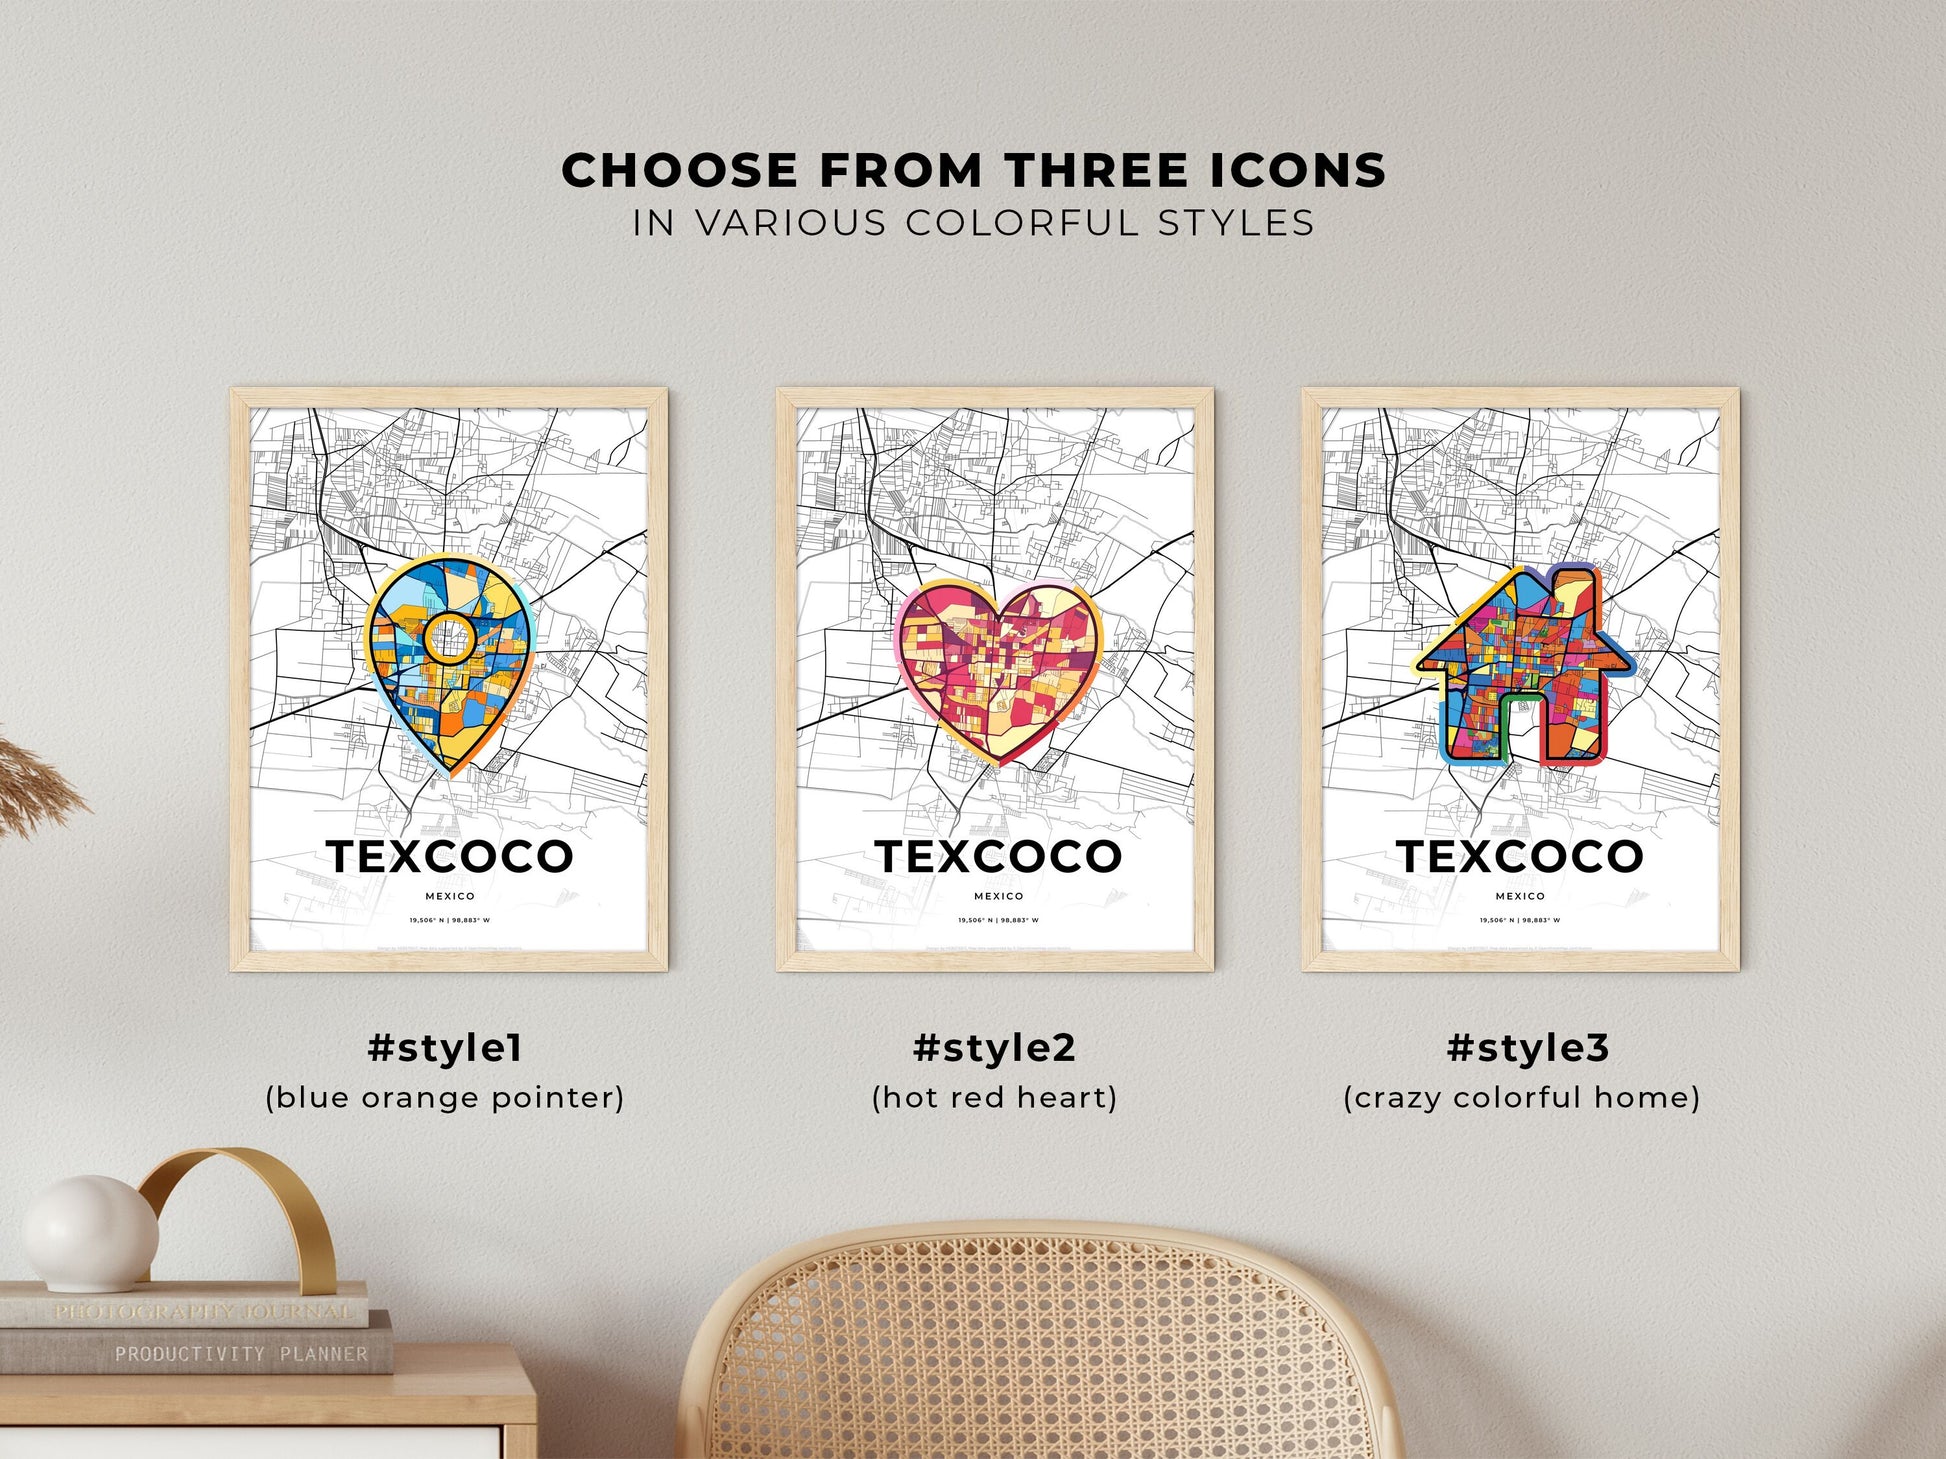 TEXCOCO MEXICO minimal art map with a colorful icon. Where it all began, Couple map gift.